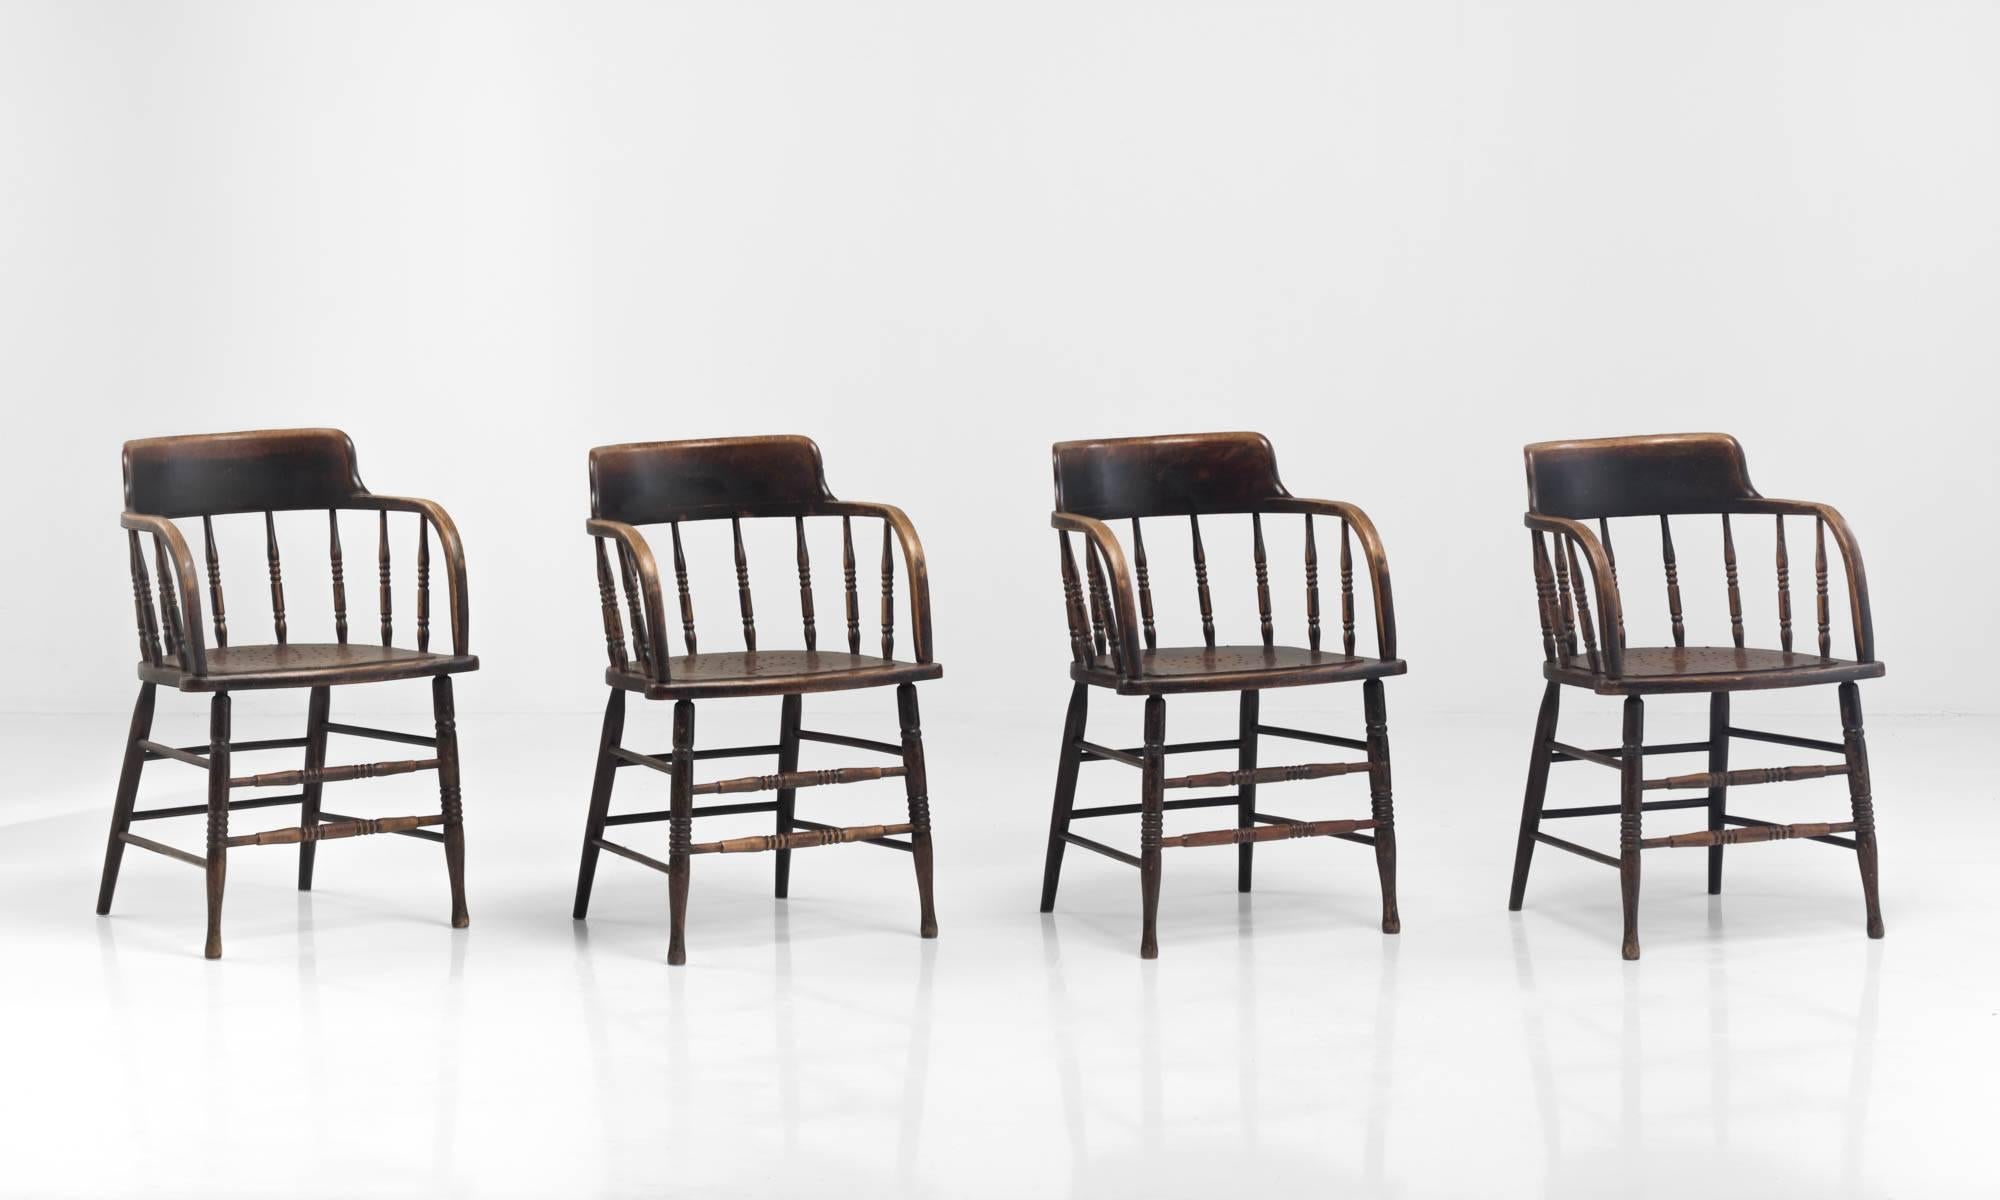 Four Taylor and Hobson wooden armchairs.

Handsome armchairs with turned legs and supports. Marked Taylor and Hobson Limited: Huddersfield.

Made in England, circa 1900.